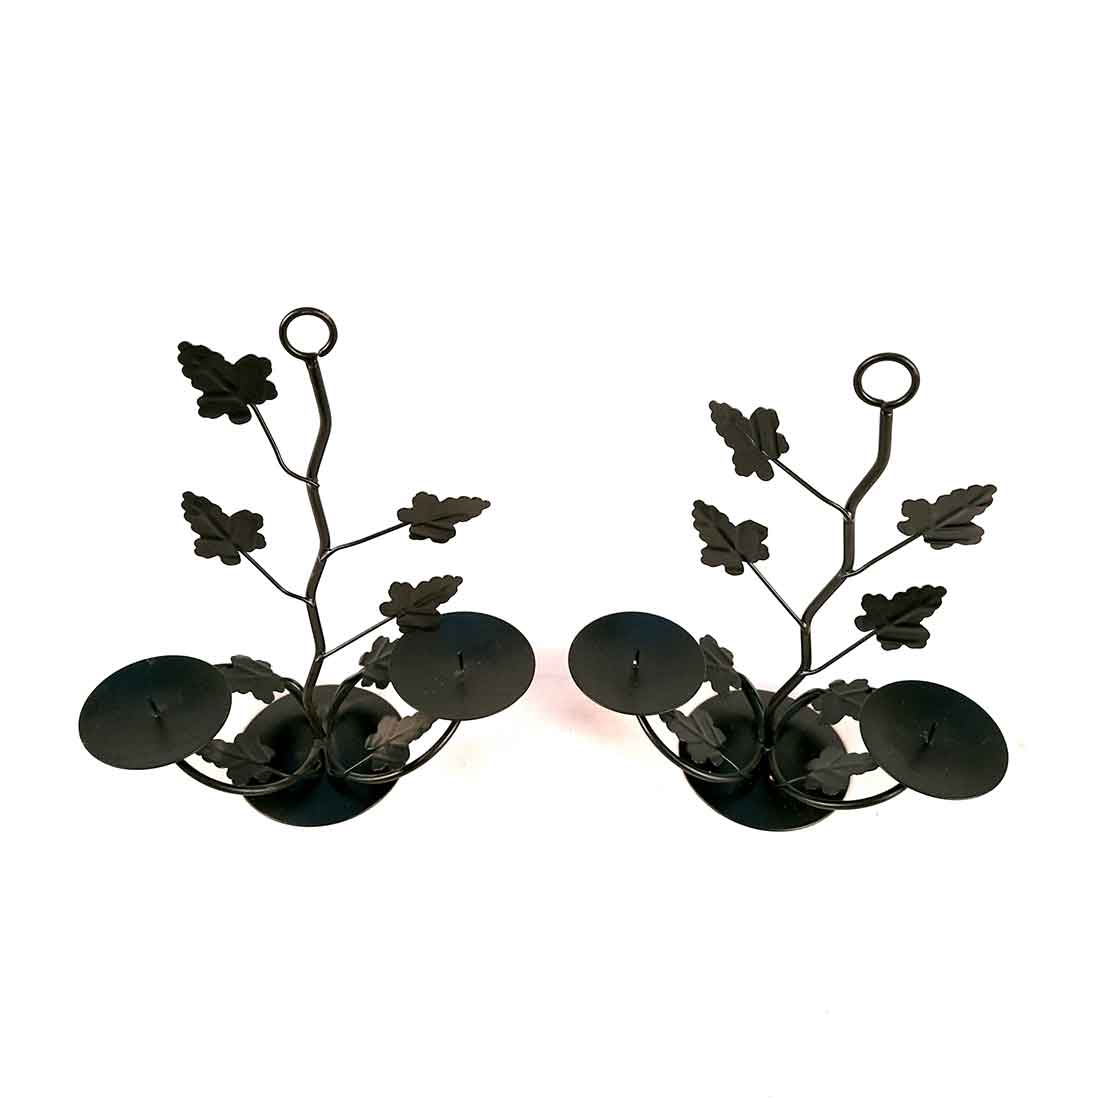 TeaLight Holder Antique | Candle Holders Stand With Two Slots | Tea Light Candle Stands - Tree Branch Design - For Home, Table, Living Room, Dining room, Bedroom Decor | For Festival Decoration & Gifts  - Set of 2